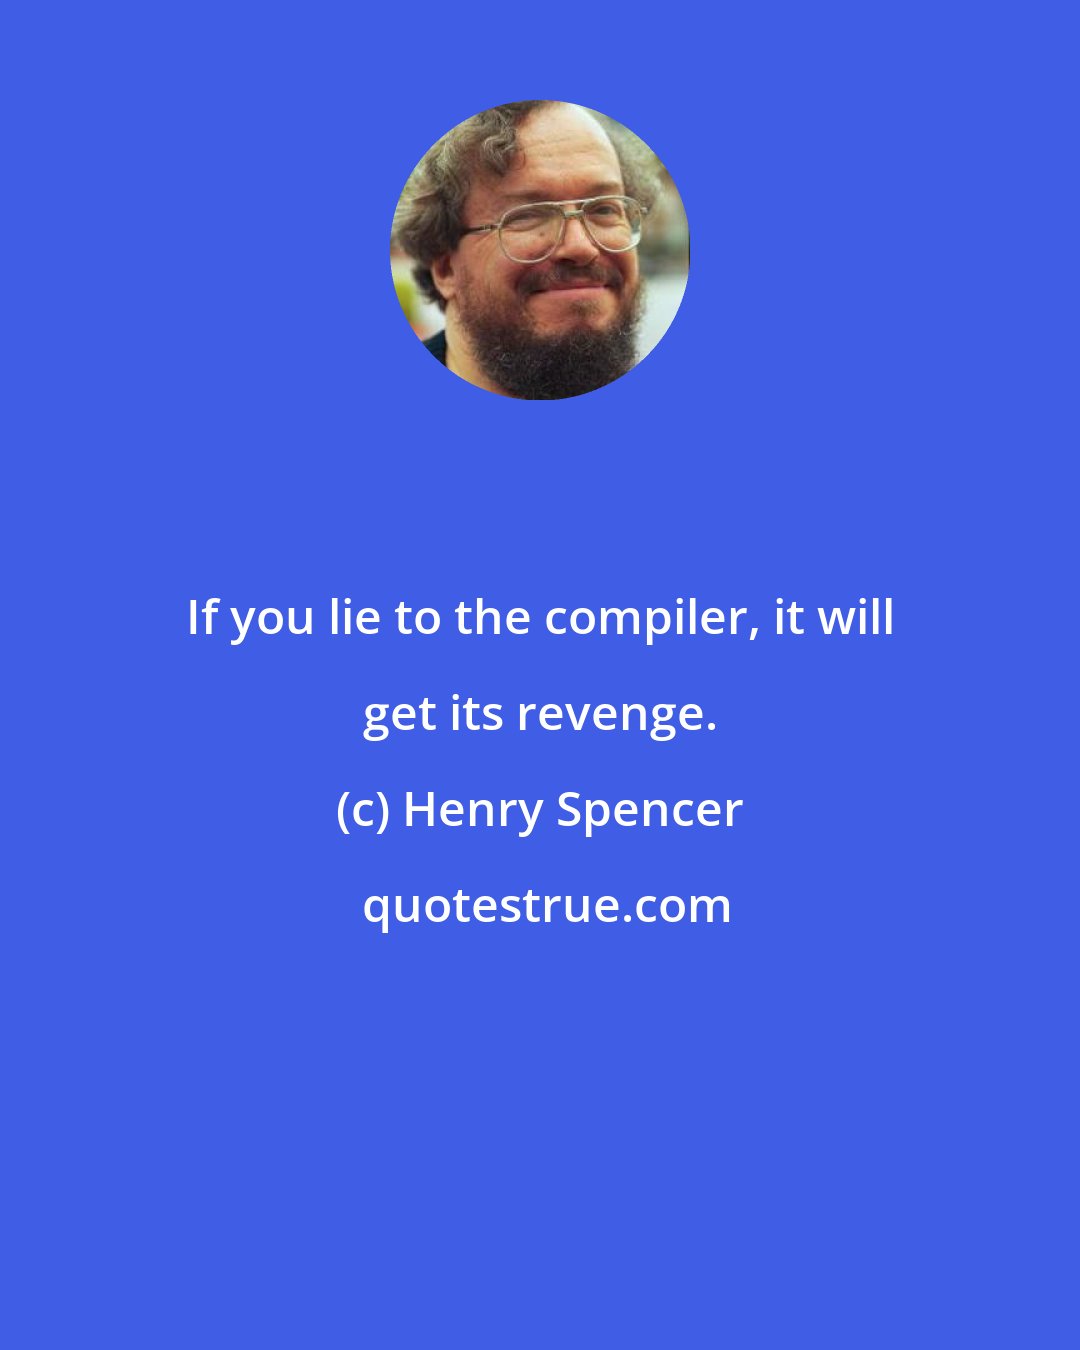 Henry Spencer: If you lie to the compiler, it will get its revenge.